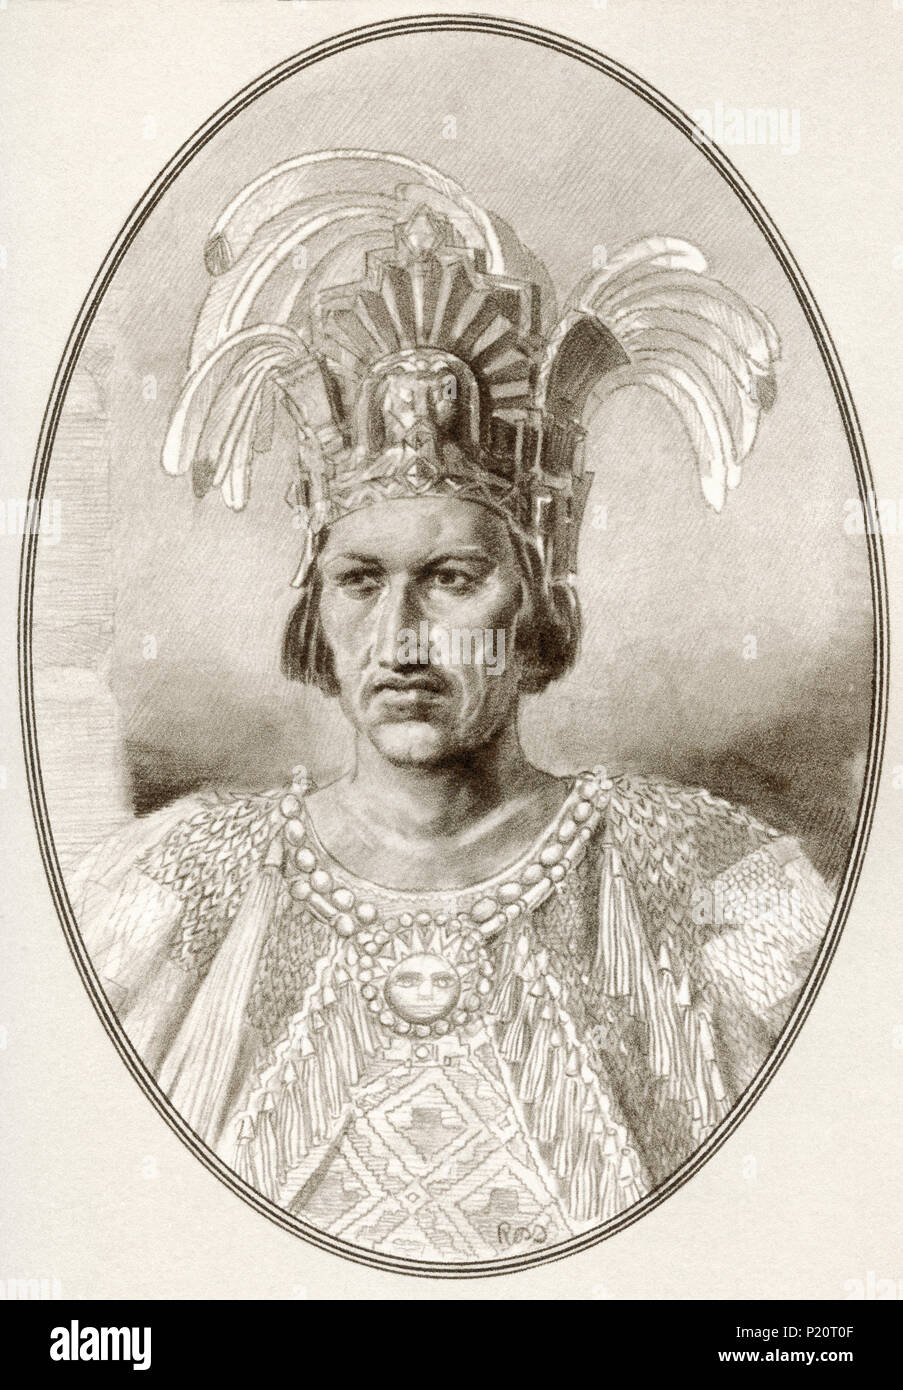 Moctezuma II , c. 1466 – 1520, also spelled Montezuma, Moteuczoma, Motecuhzoma, Motēuczōmah, and Motecuhzoma Xocoyotzin. Ninth tlatoani or ruler of Tenochtitlan, Mexico.  Illustration by Gordon Ross, American artist and illustrator (1873-1946), from Living Biographies of Famous Rulers. Stock Photo